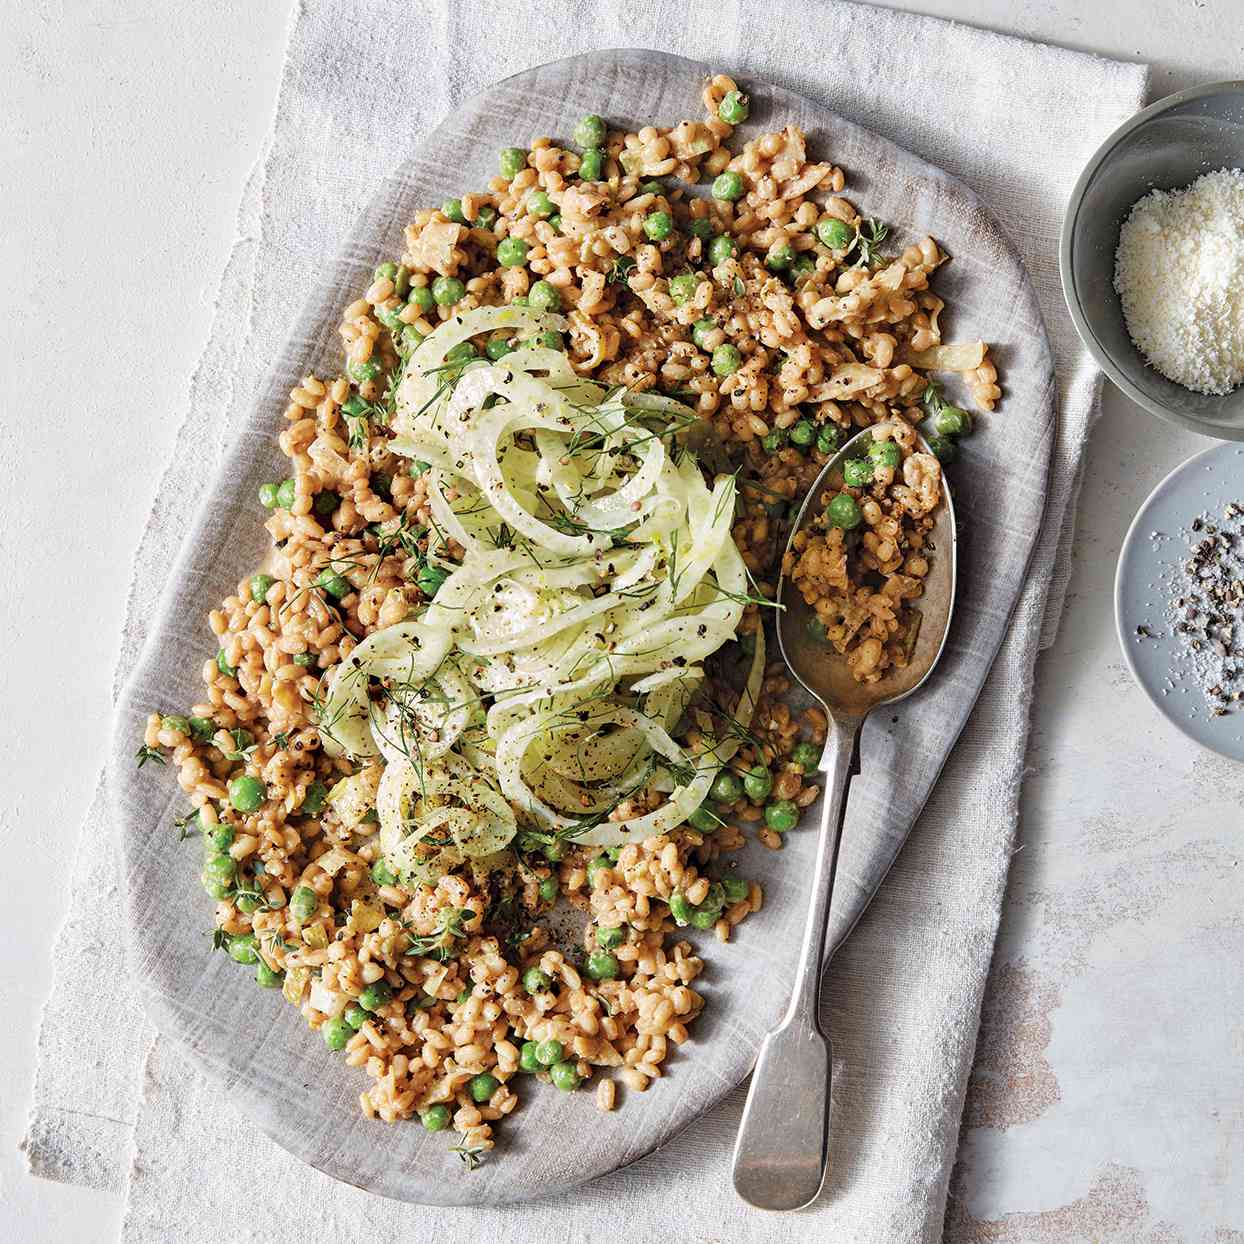 Slow-Cooker Parmesan & Pea Farro with Fennel Salad